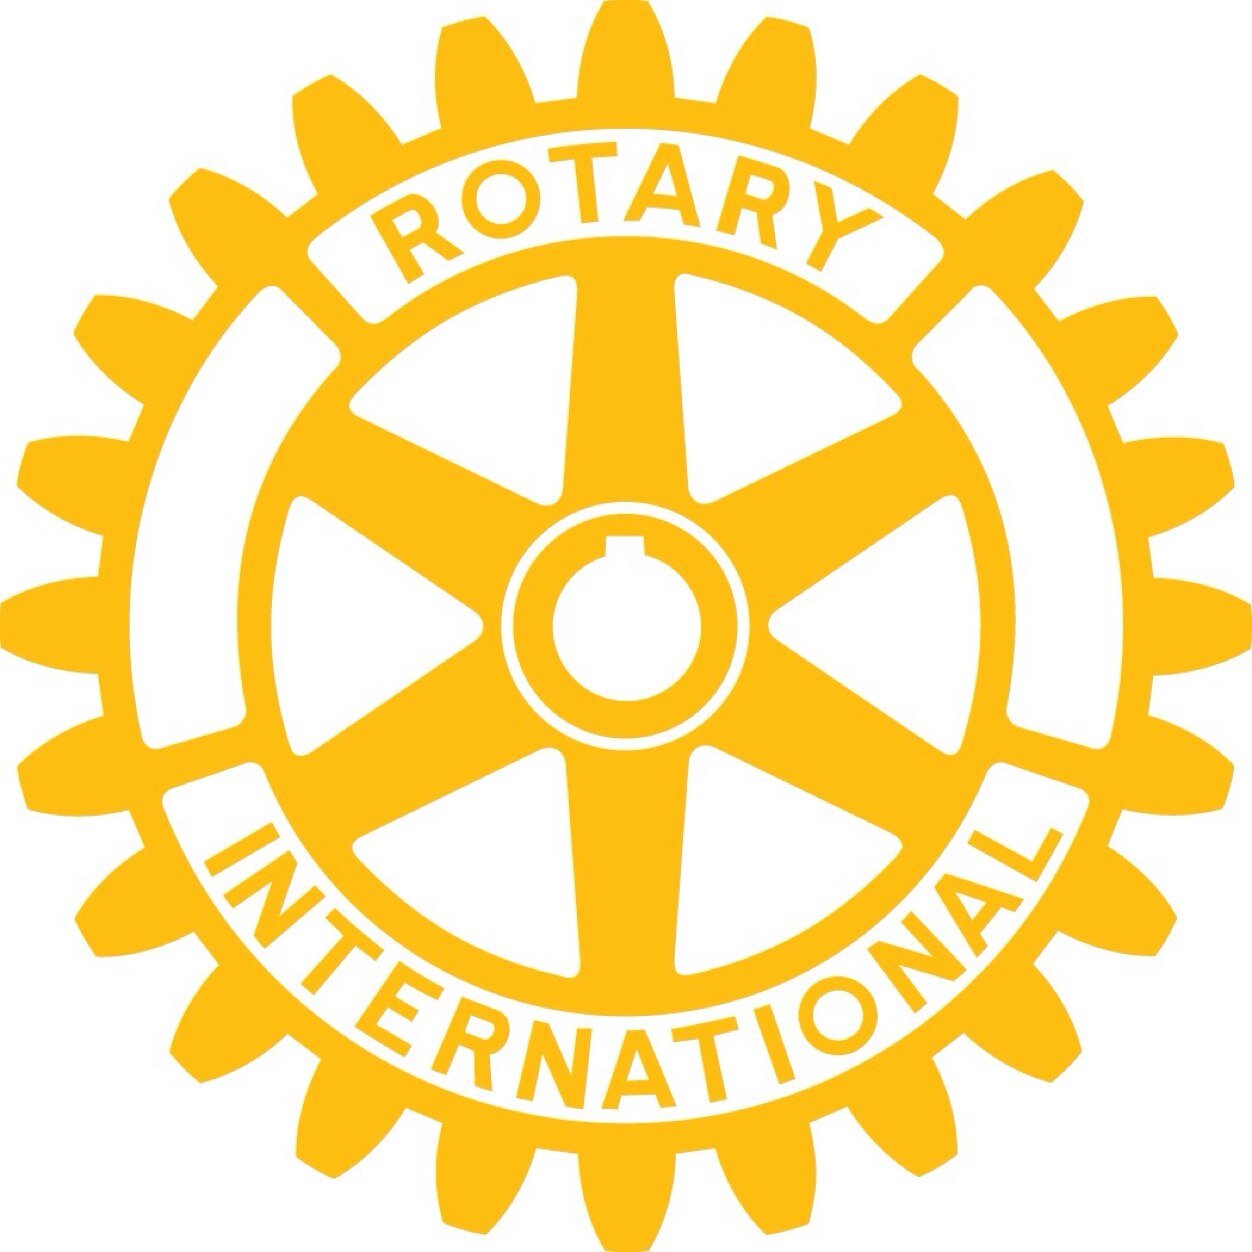 Instantly connect to Rotary, Rotaract and Interact Clubs of the world